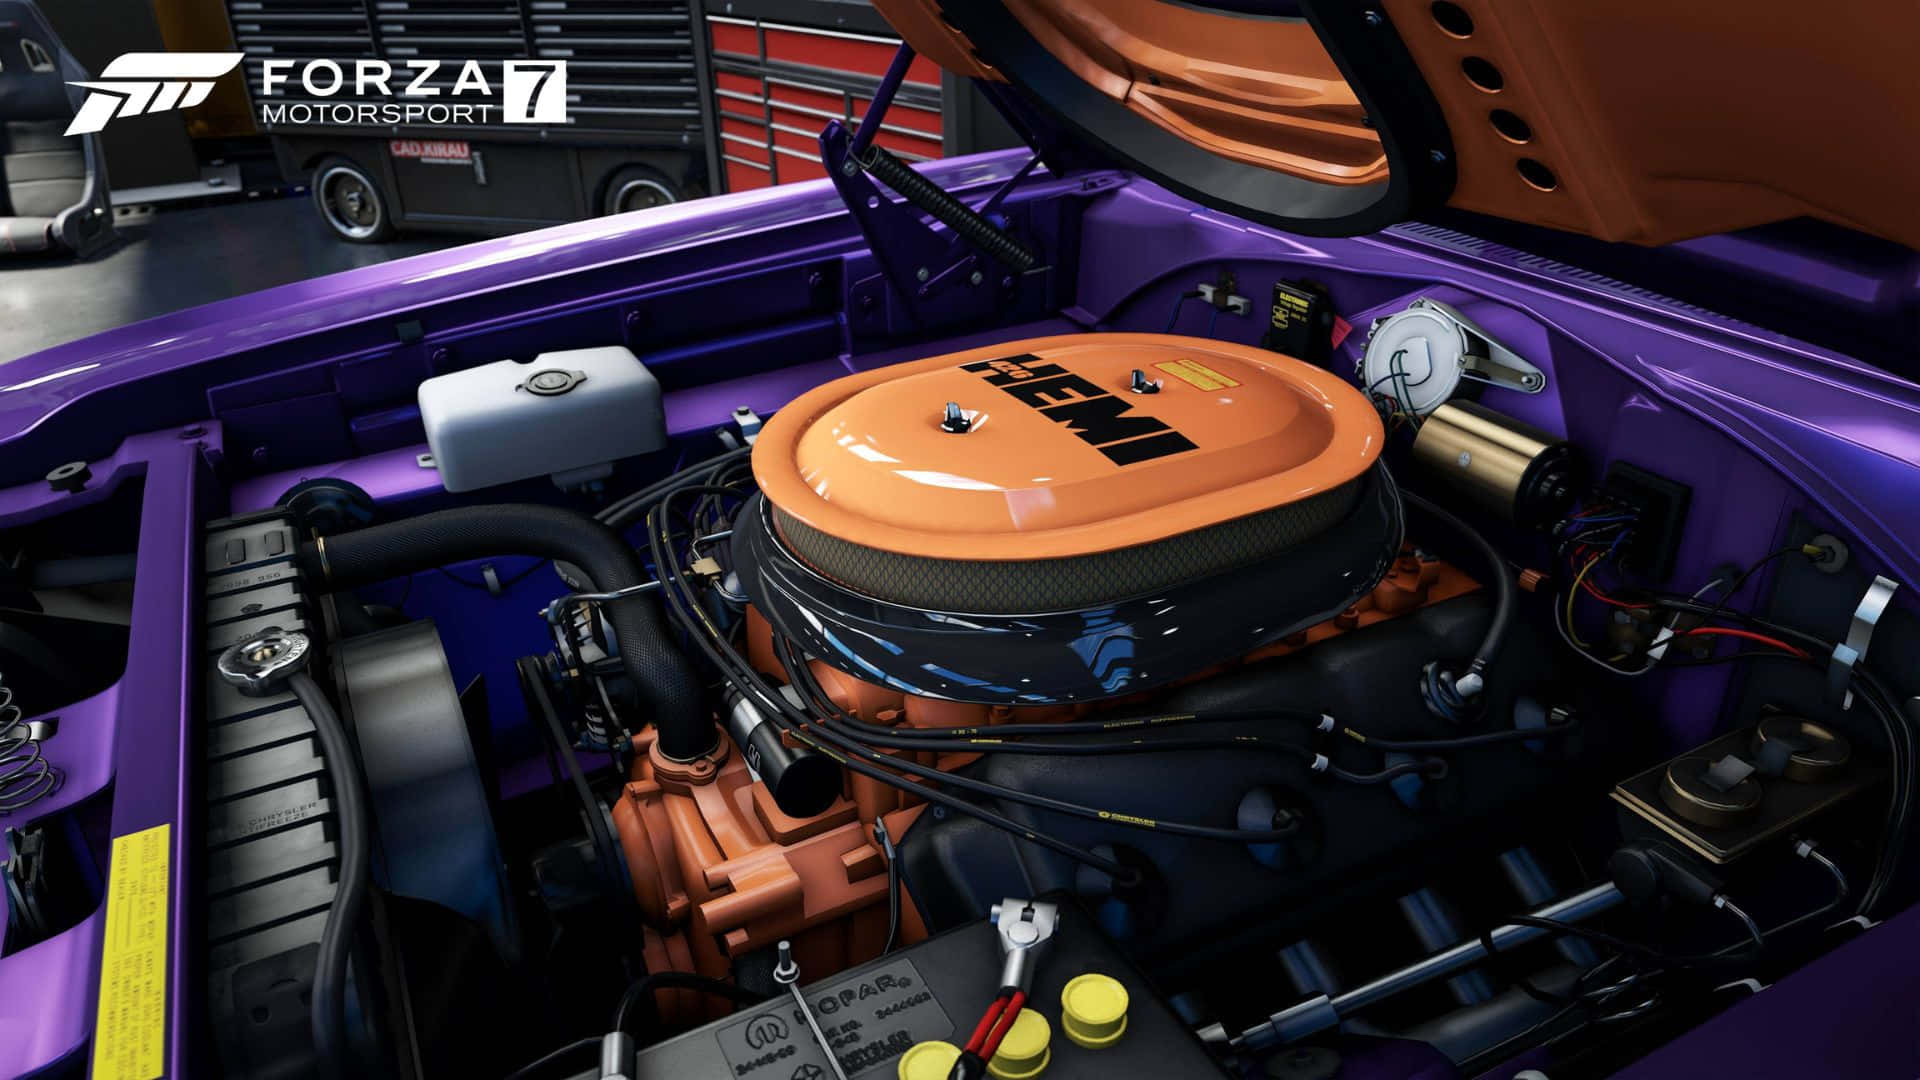 Hd Forza Motorsport 7 Background With Car Engine